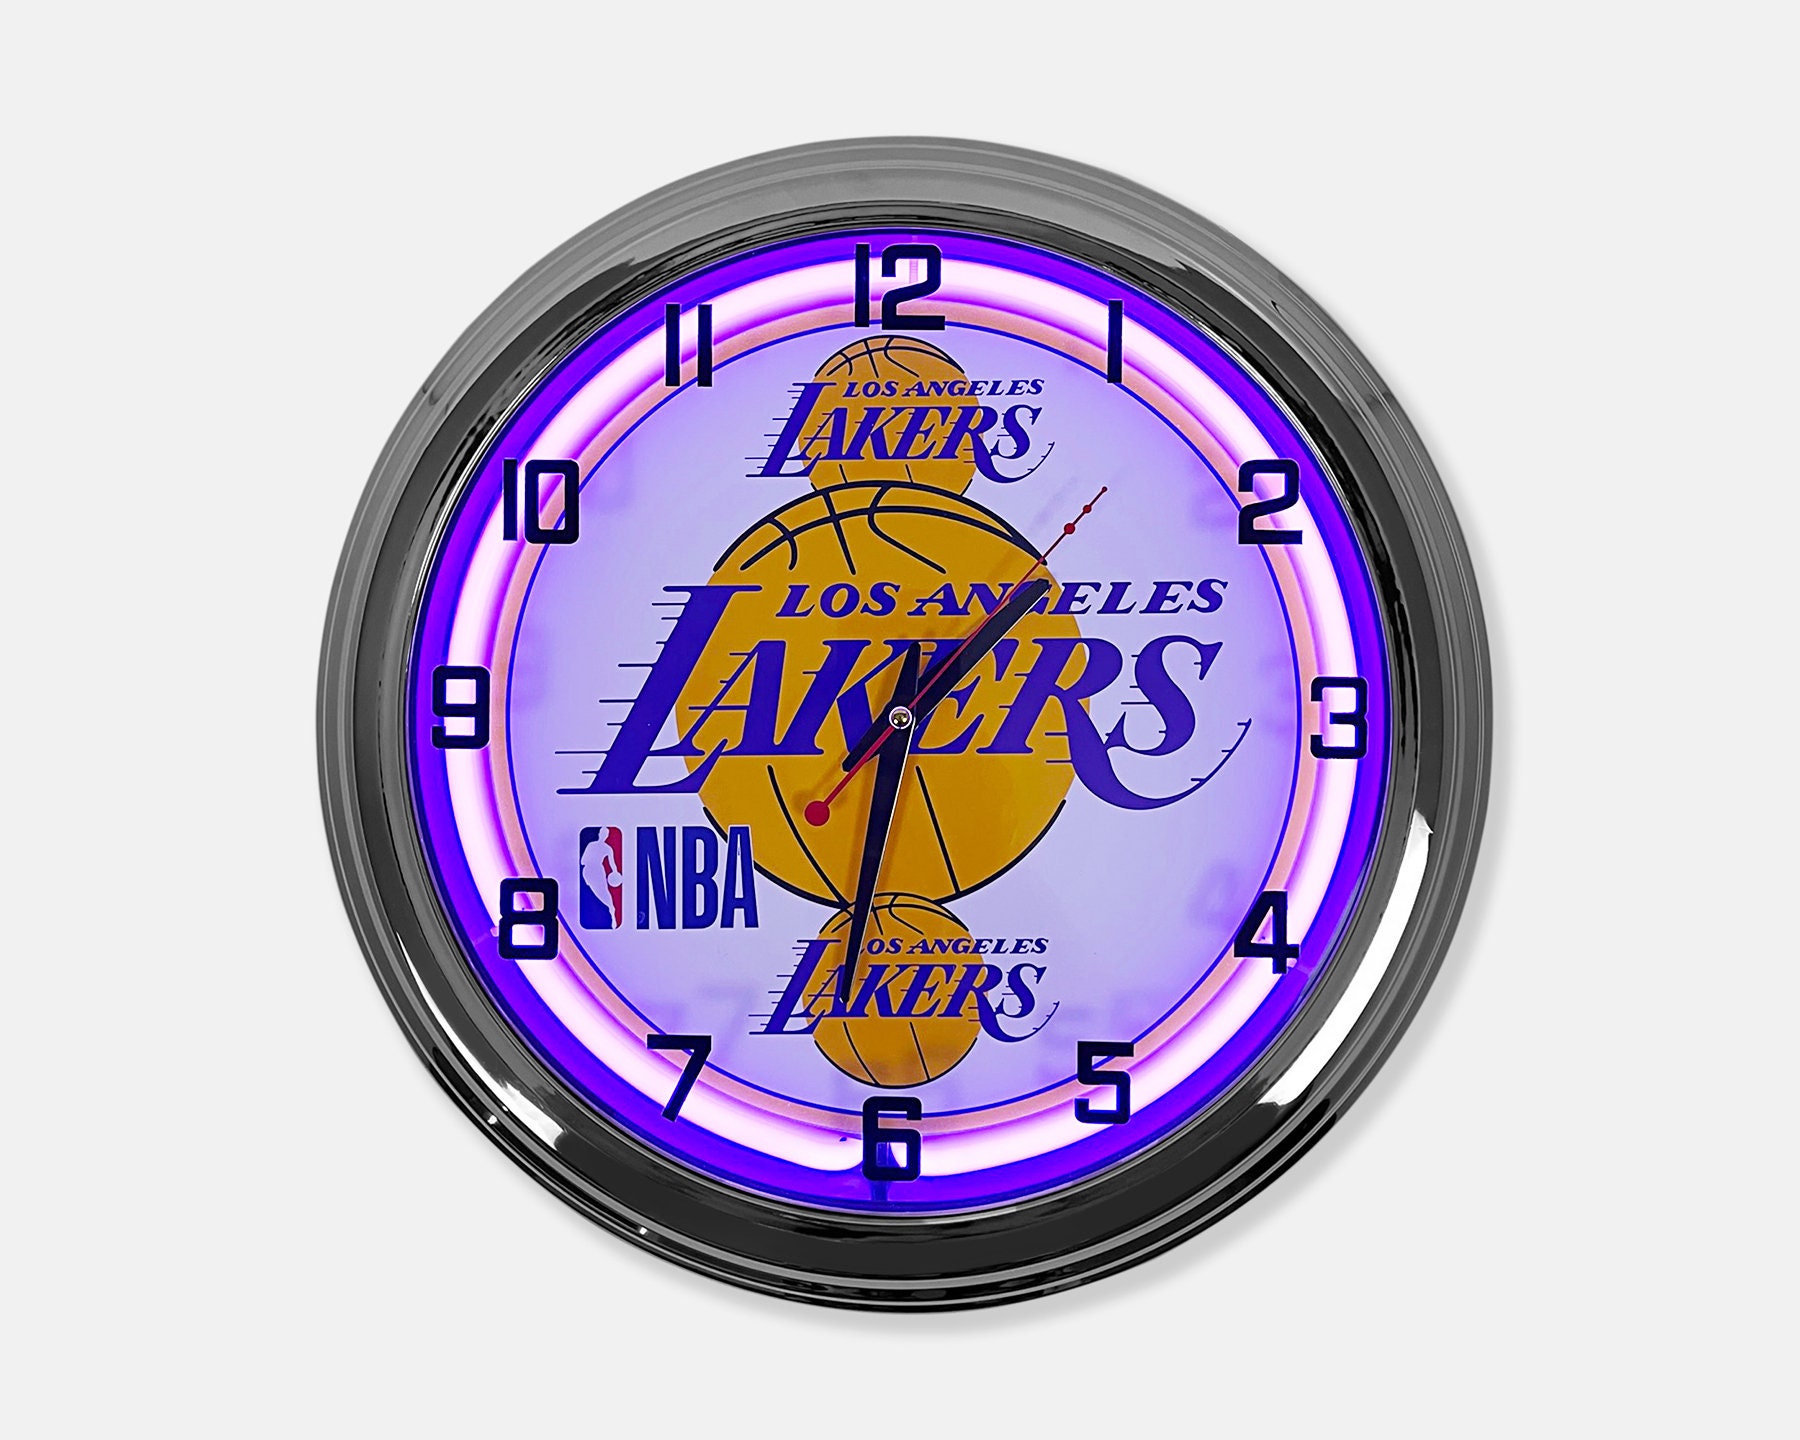 LOS ANGELES LAKERS NEON LIGHT SIGN LED KOBE BRYANT HOME ROOM DECOR SPORTS  GIFT